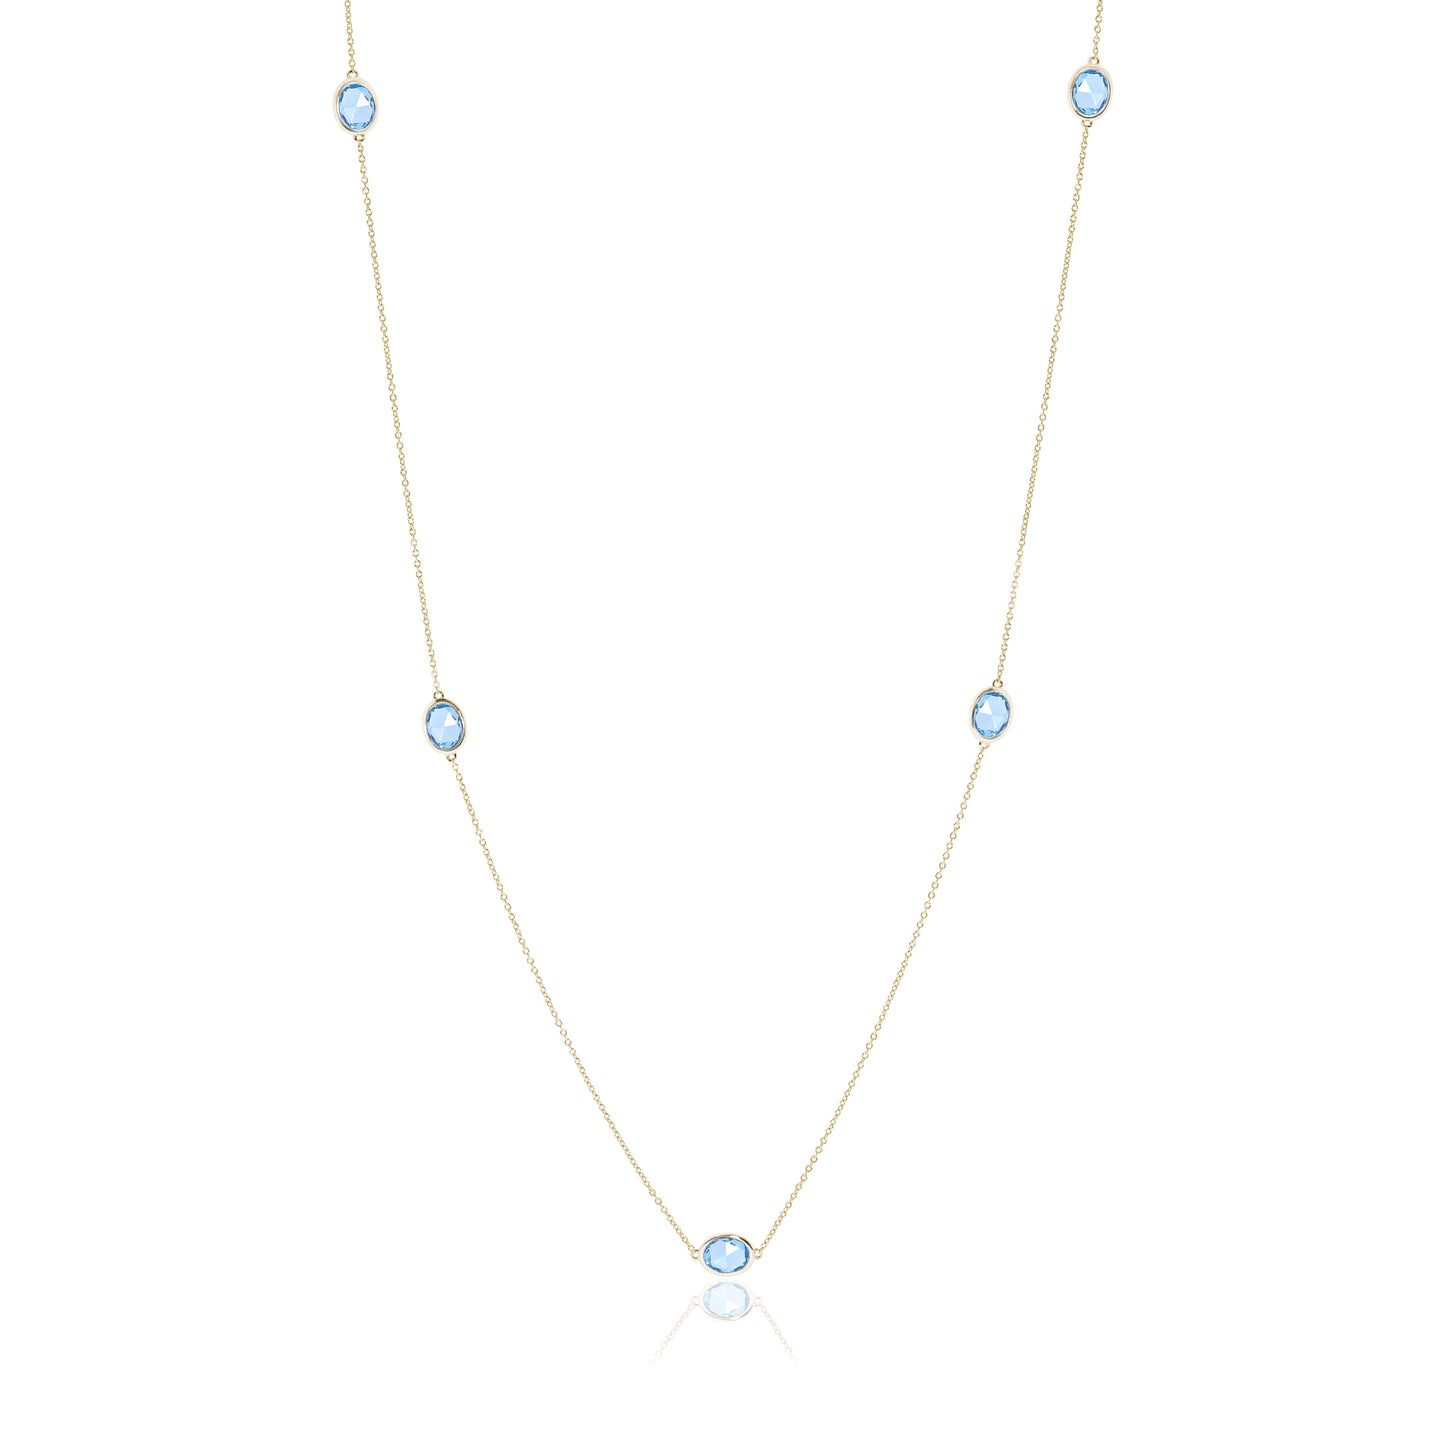 Station Necklace in Swiss Blue Topaz